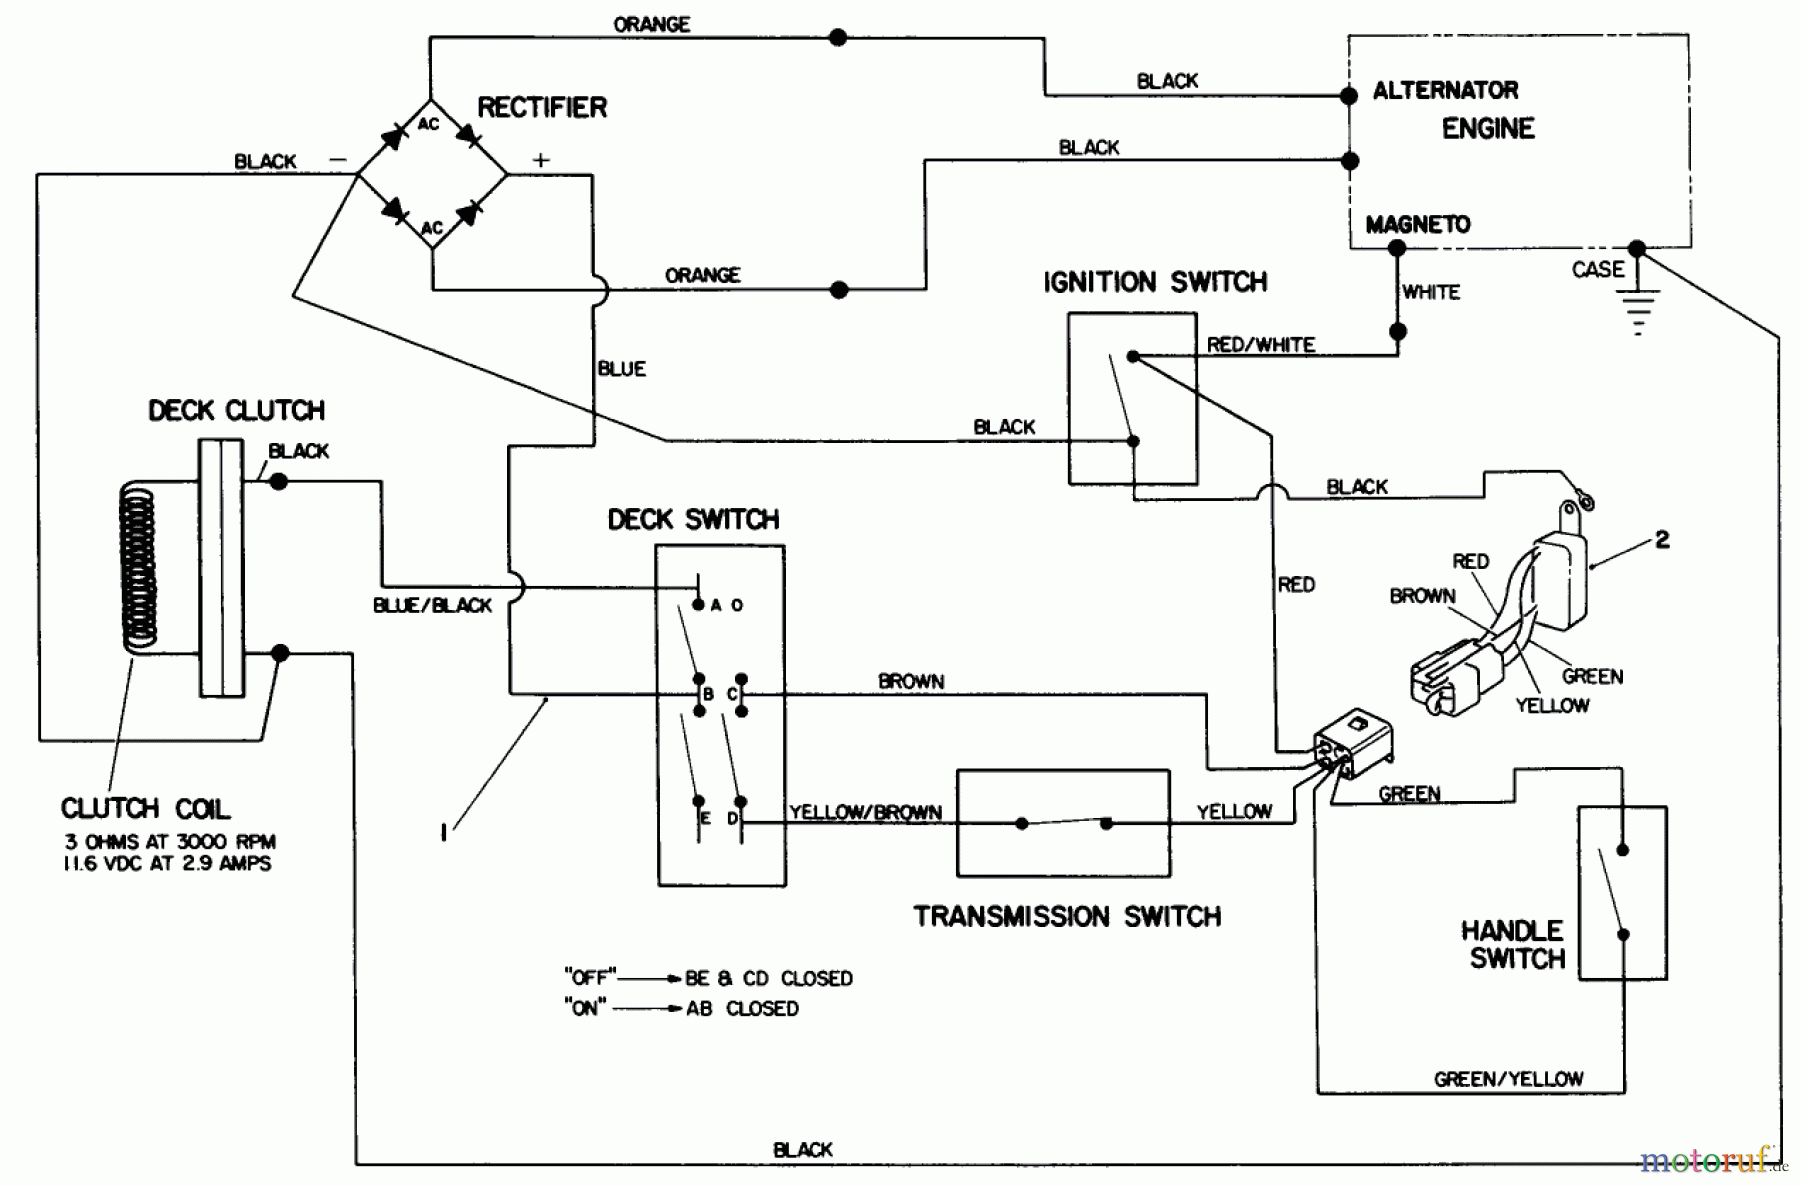  Toro Neu Mowers, Drive Unit Only 30115 - Toro Mid-Size Proline Gear Traction Unit, 12.5 hp, 1990 (0000001-0999999) ELECTRICAL SCHEMATIC